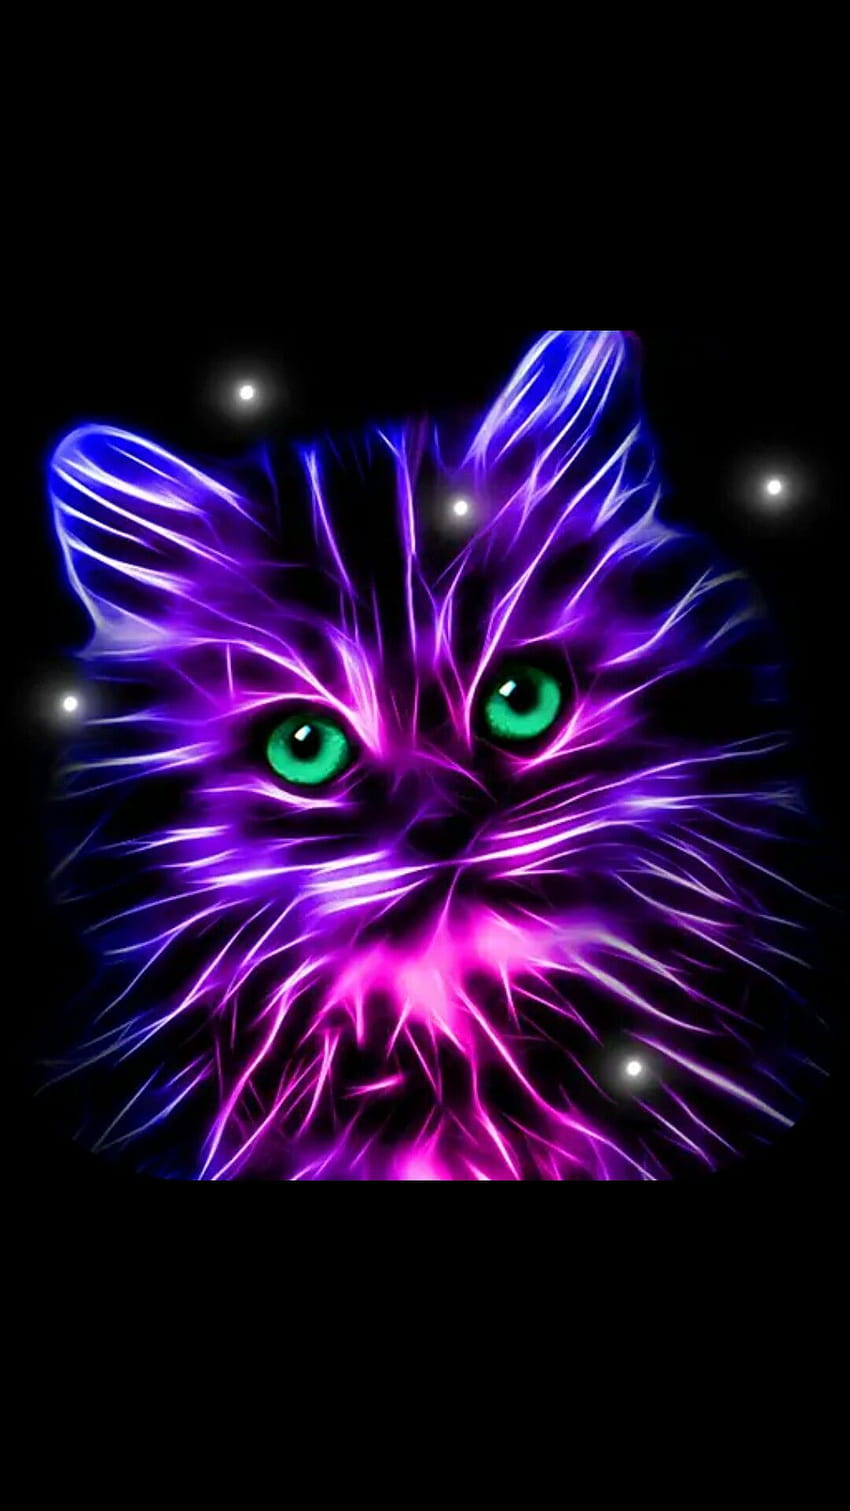 Wallpaper face stars cat neon galaxy meow images for desktop section  кошки  download